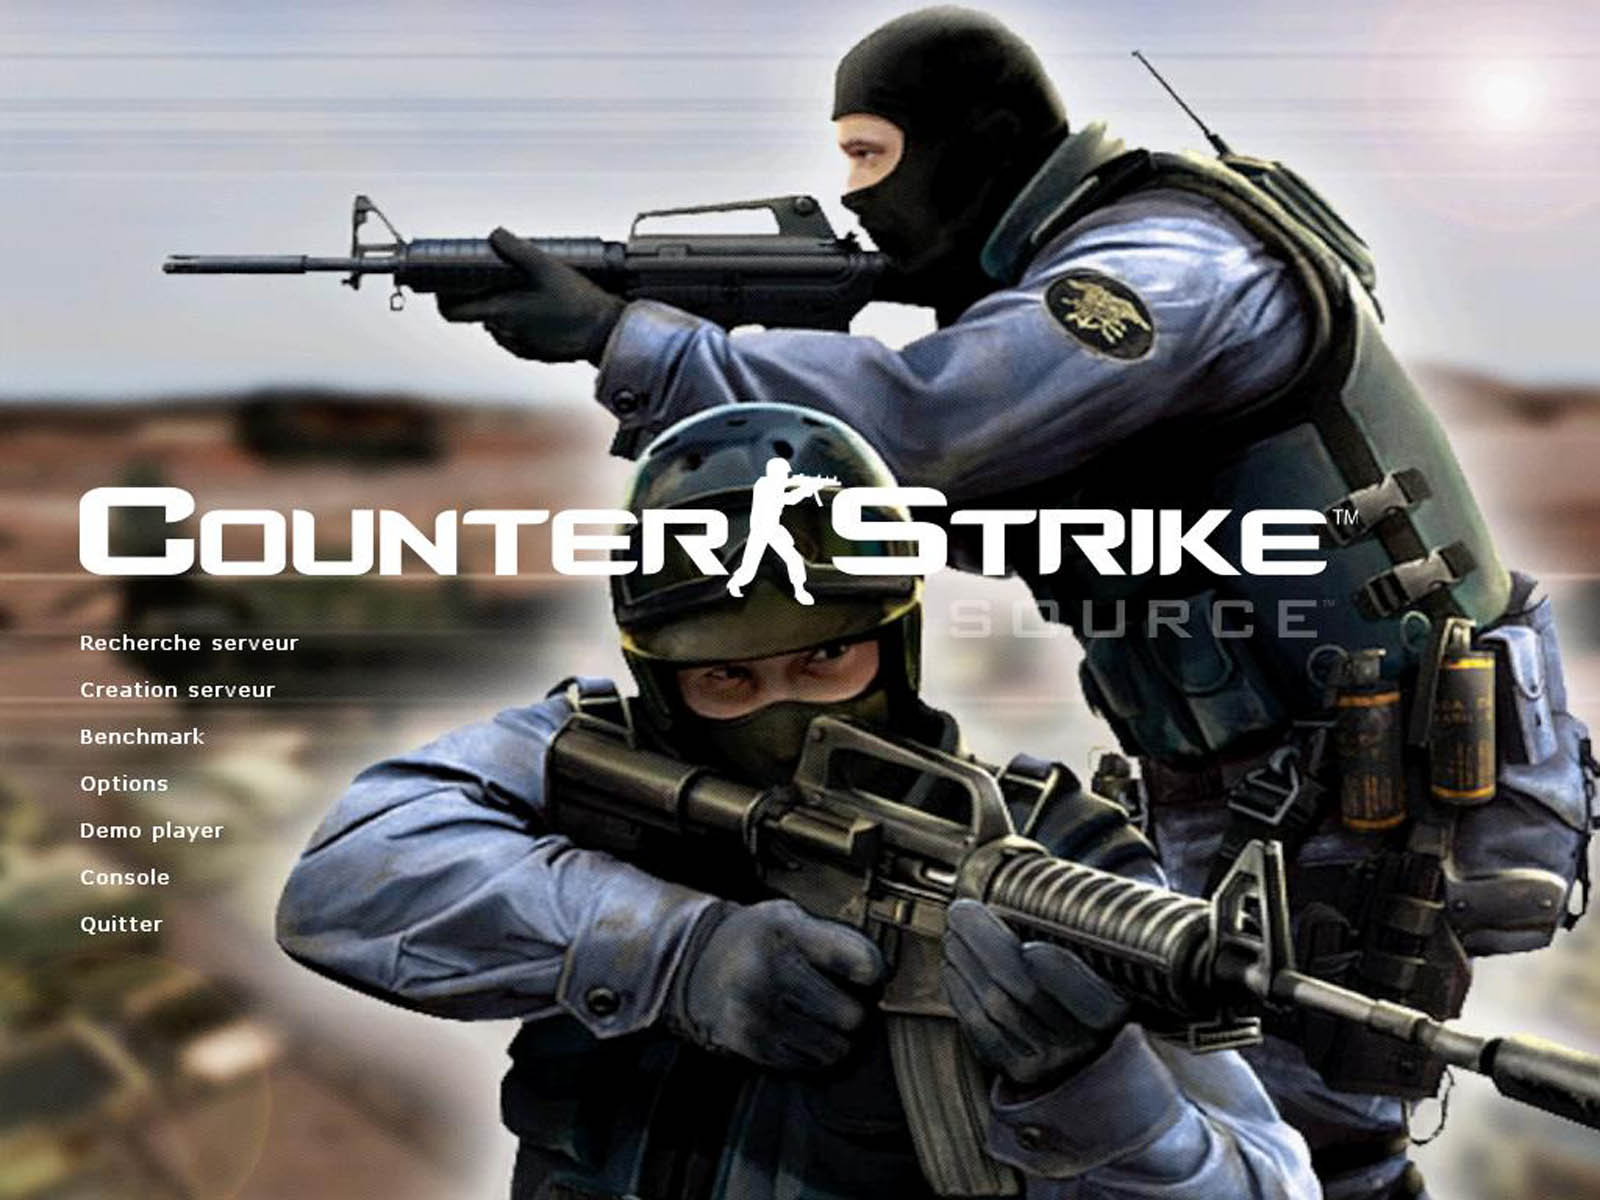 counterstrike wallpaper,soldier,shooter game,movie,pc game,action film